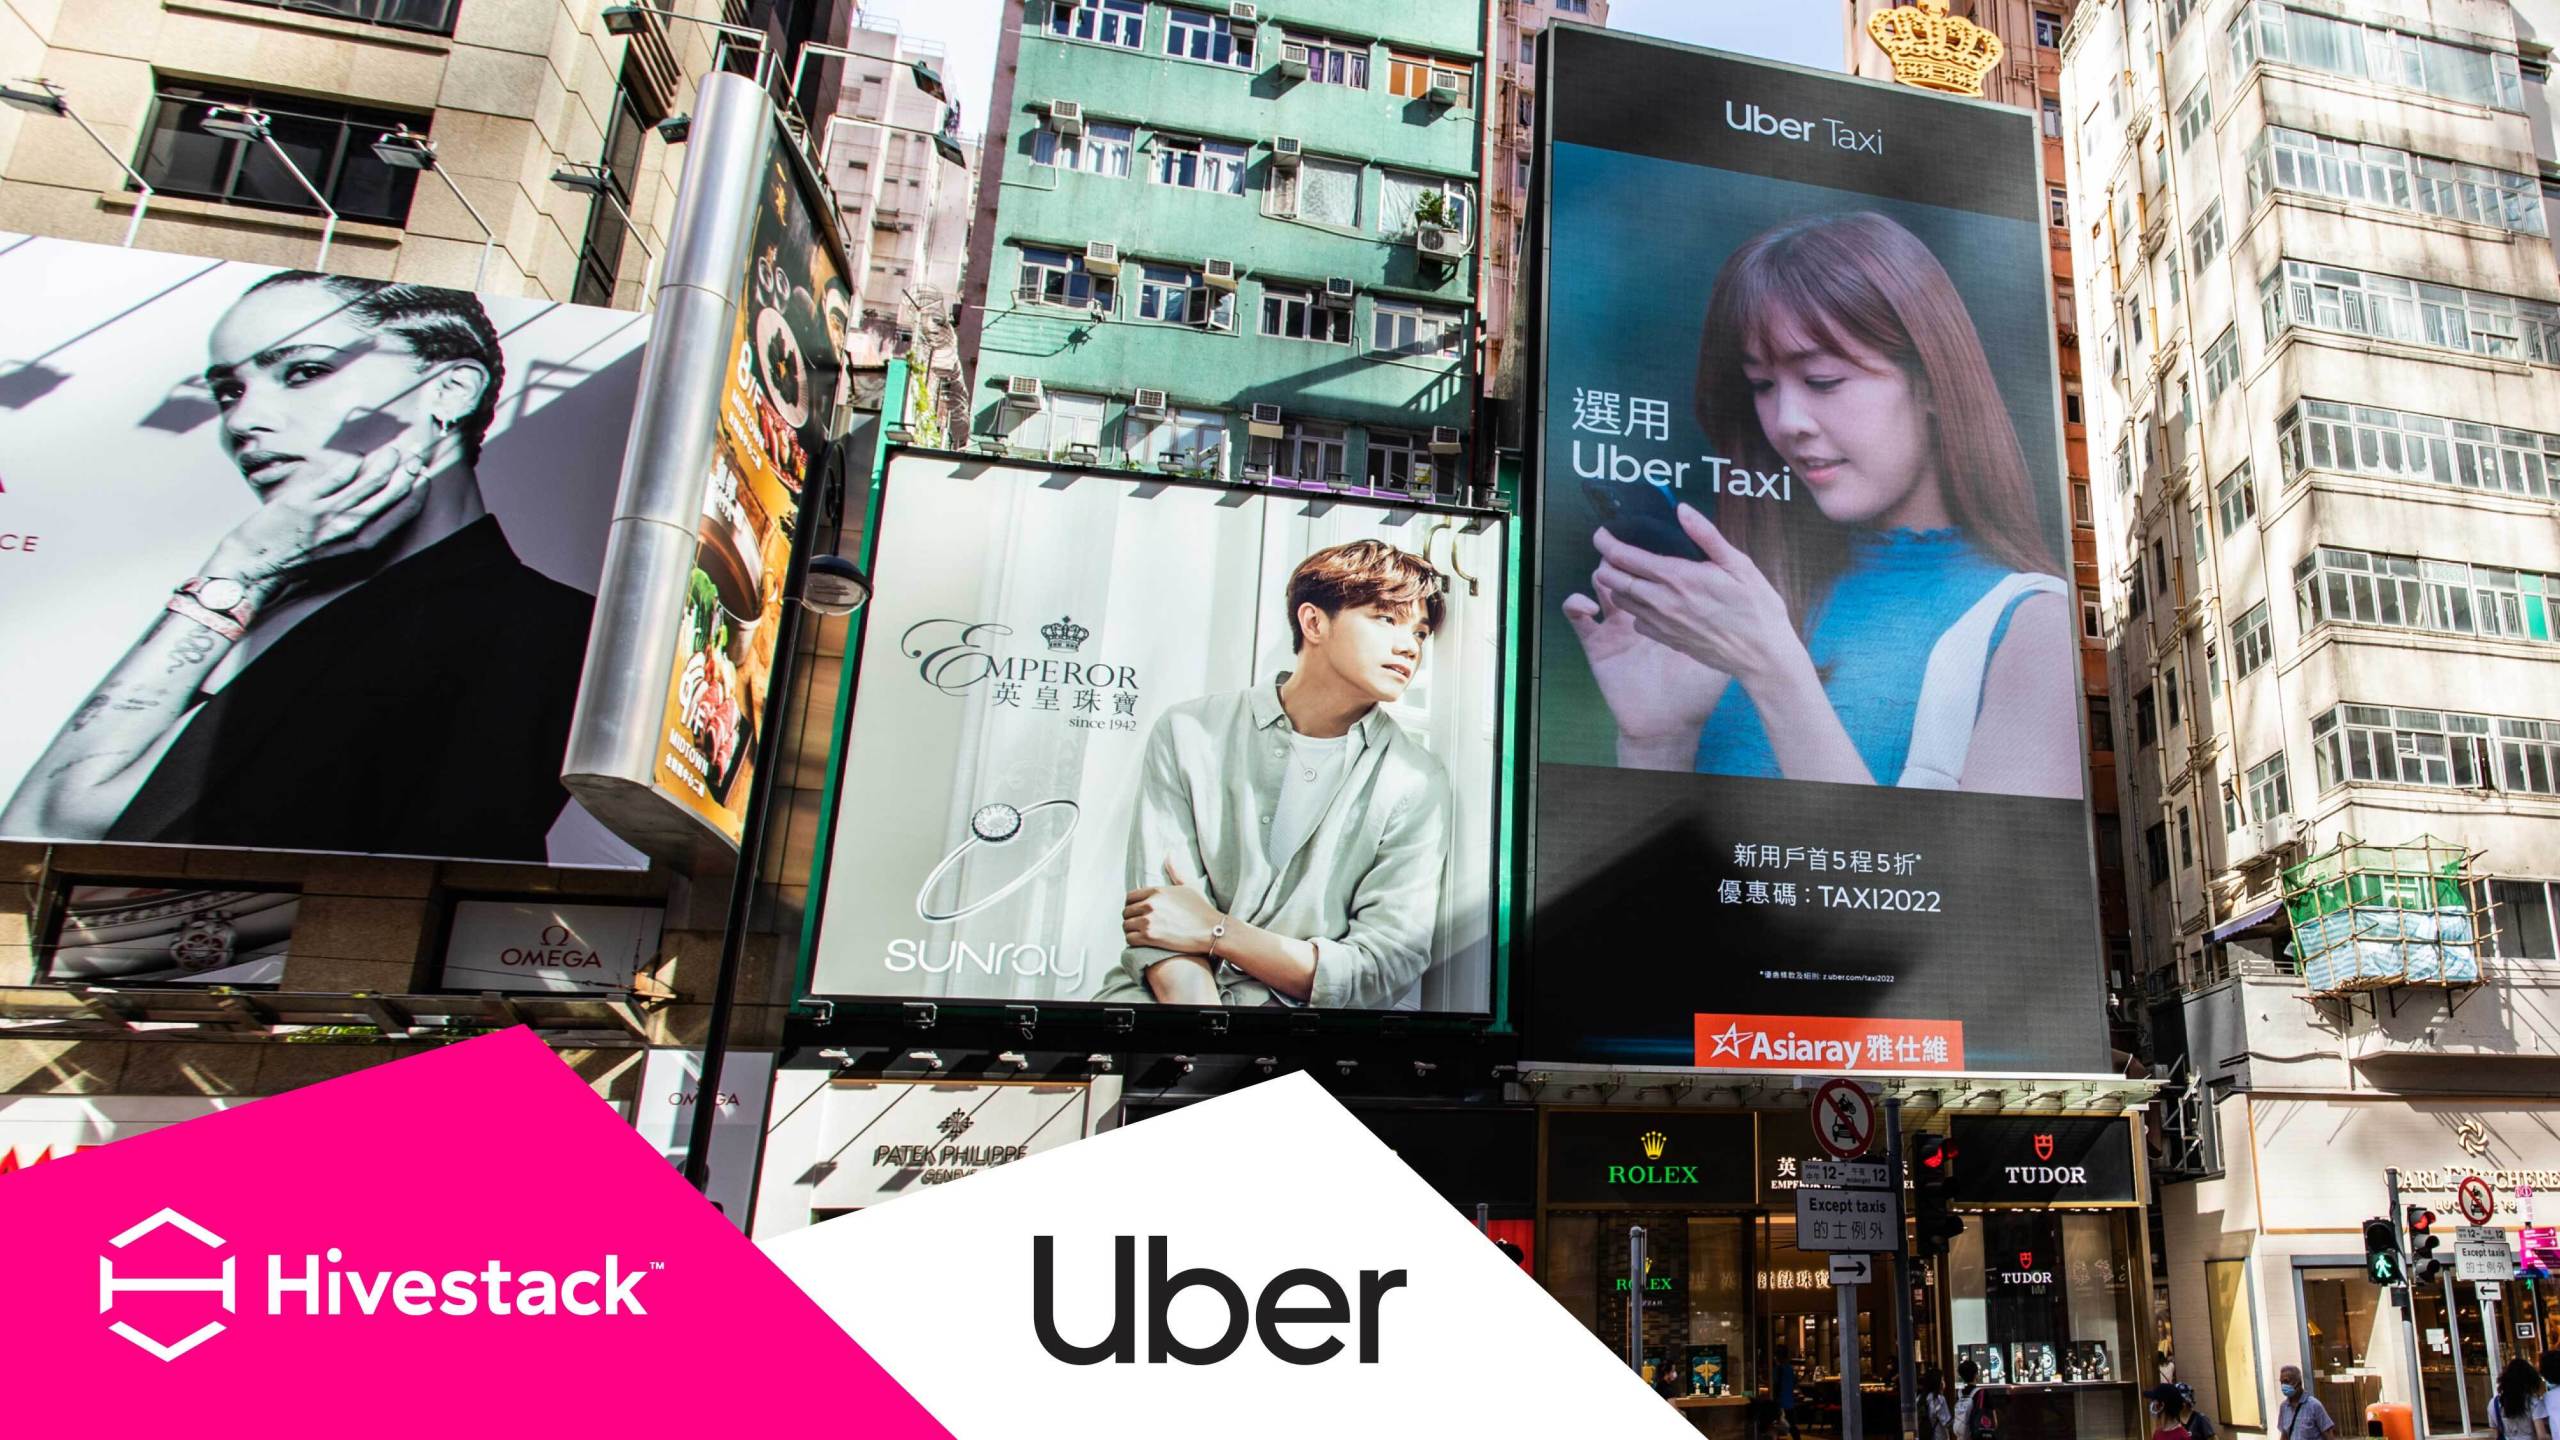 Picture of the Uber Taxi campaign on billboards